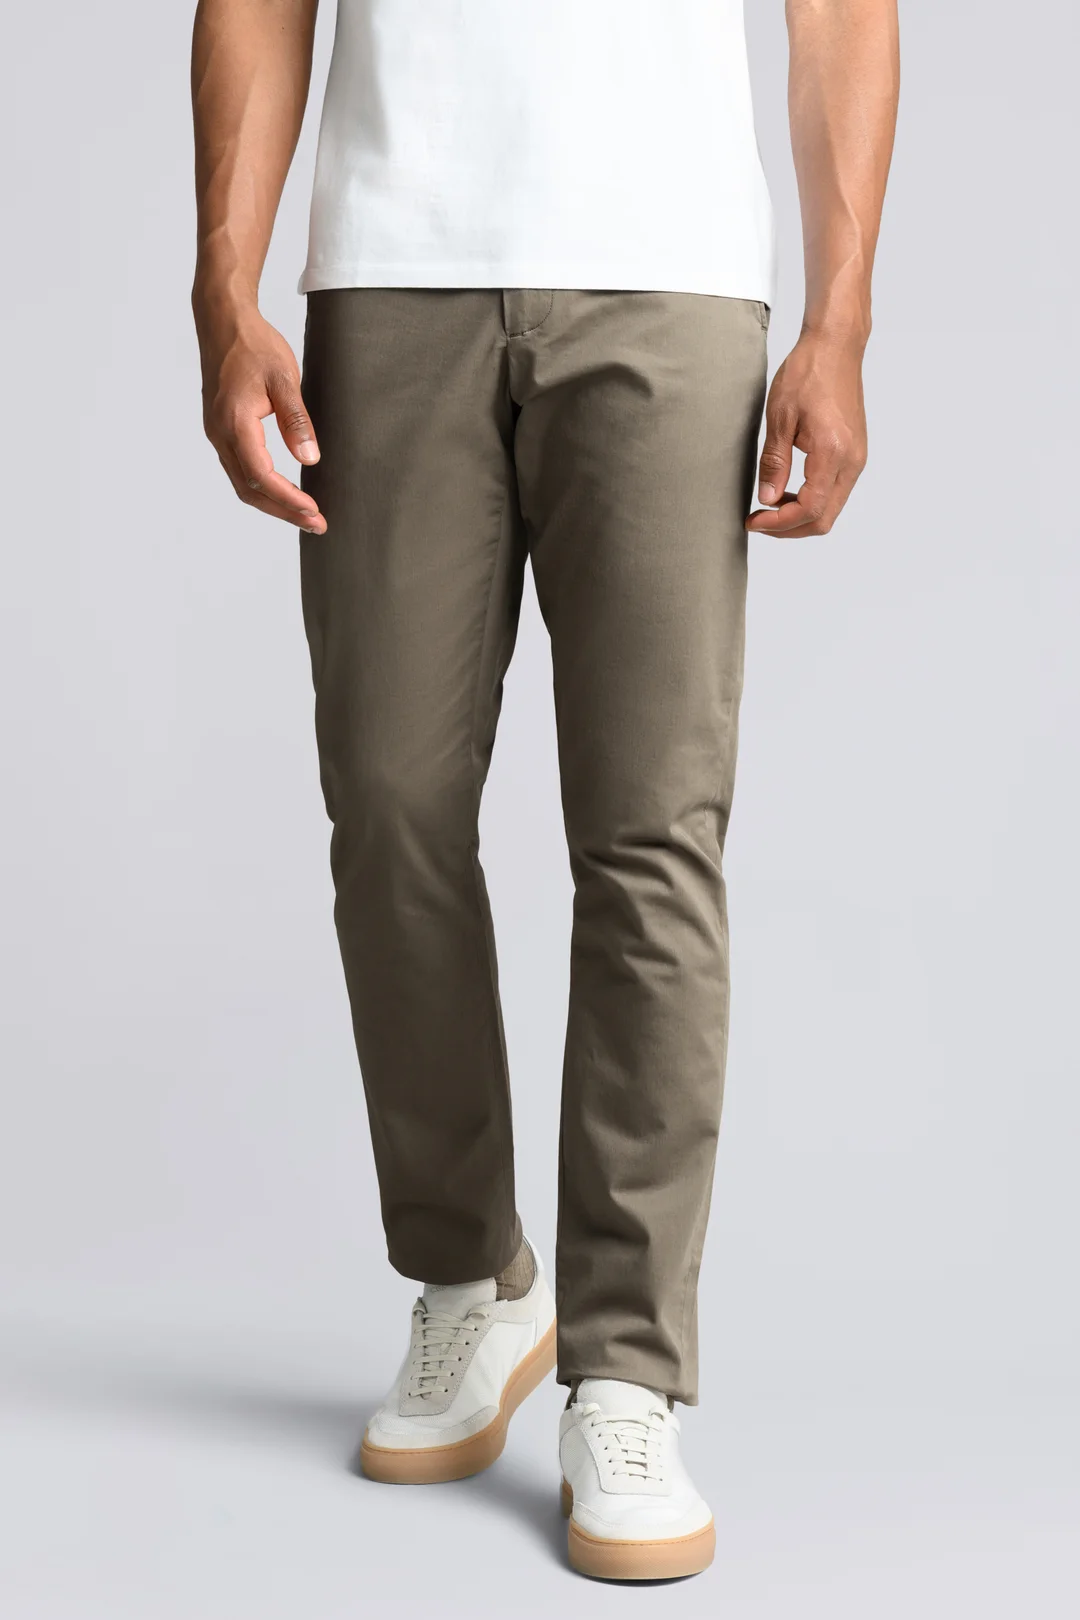 Taupe Chino | Tapered Cotton Stretch Trouser - ASKET